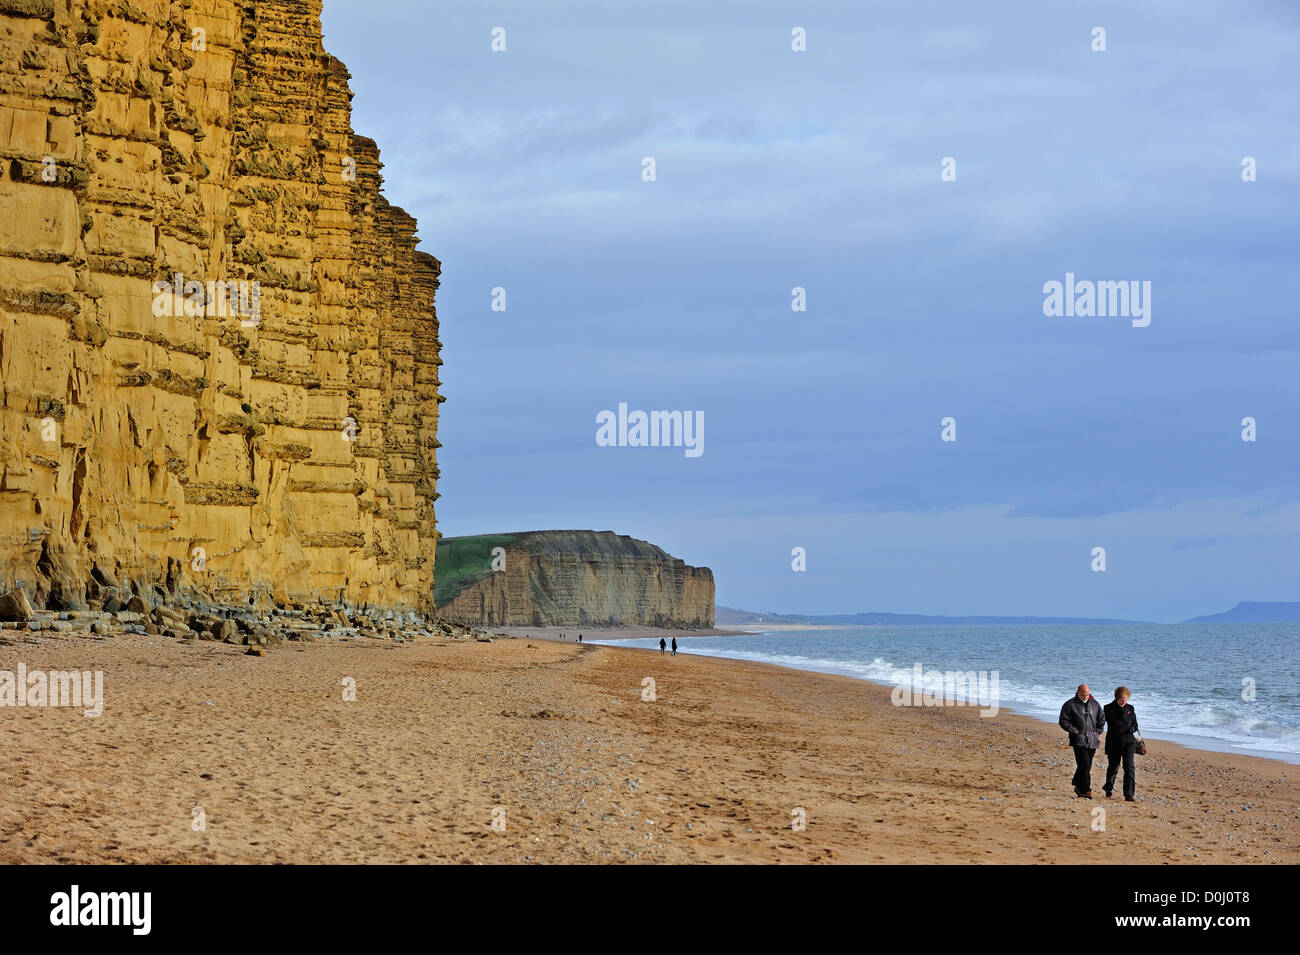 Walkers walking on beach at East Cliff, made of sandstone, near West Bay along the Jurassic Coast, Dorset, southern England, UK Stock Photo